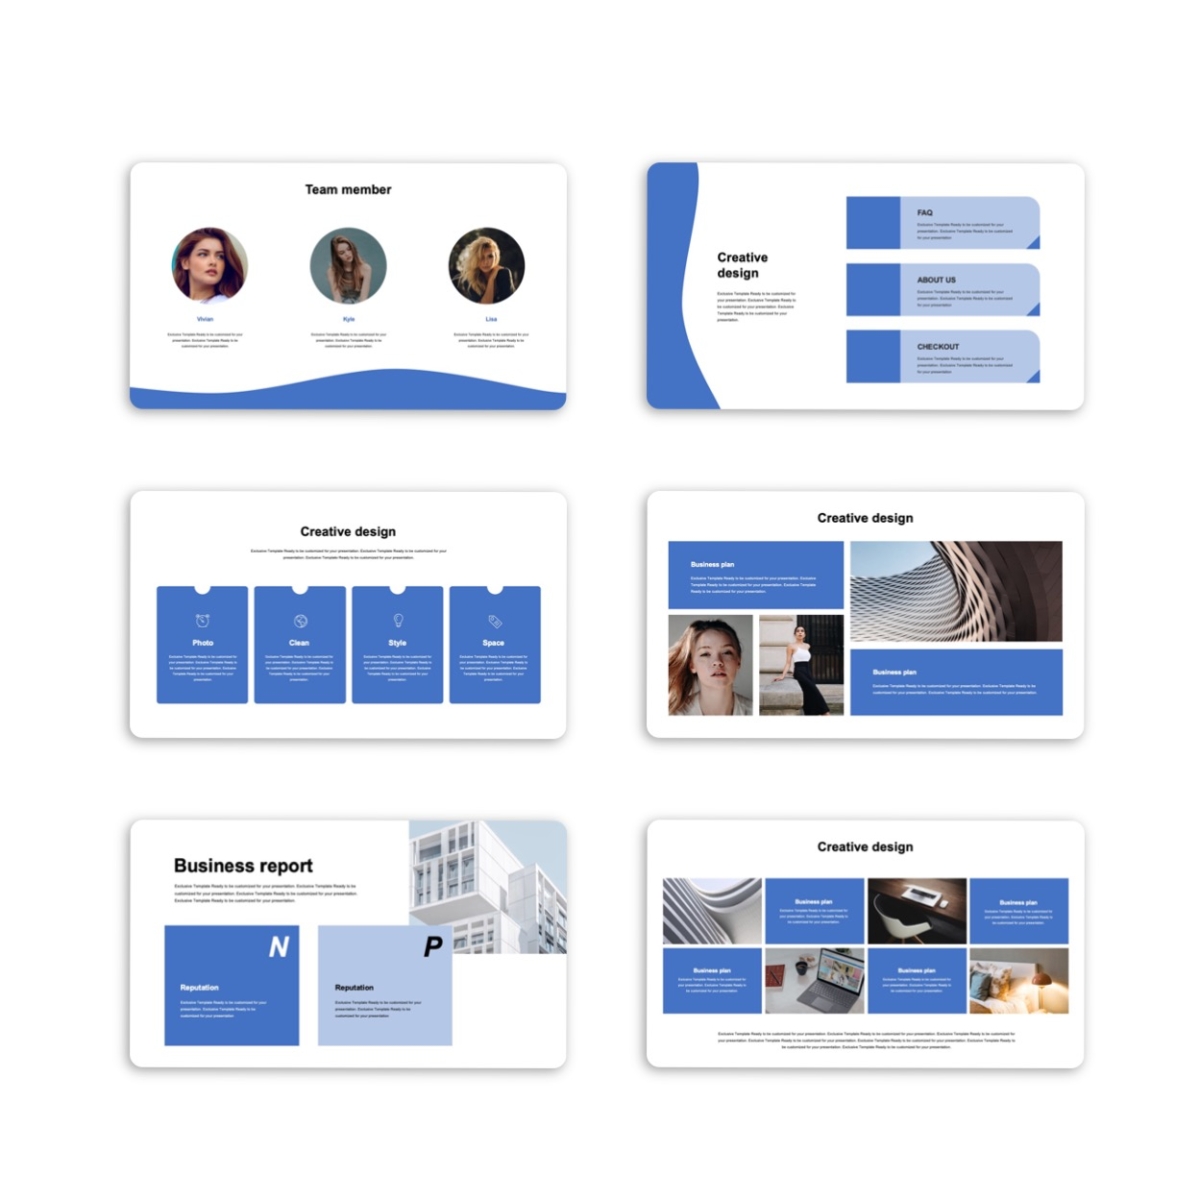 Blue White Project Report PowerPoint Template